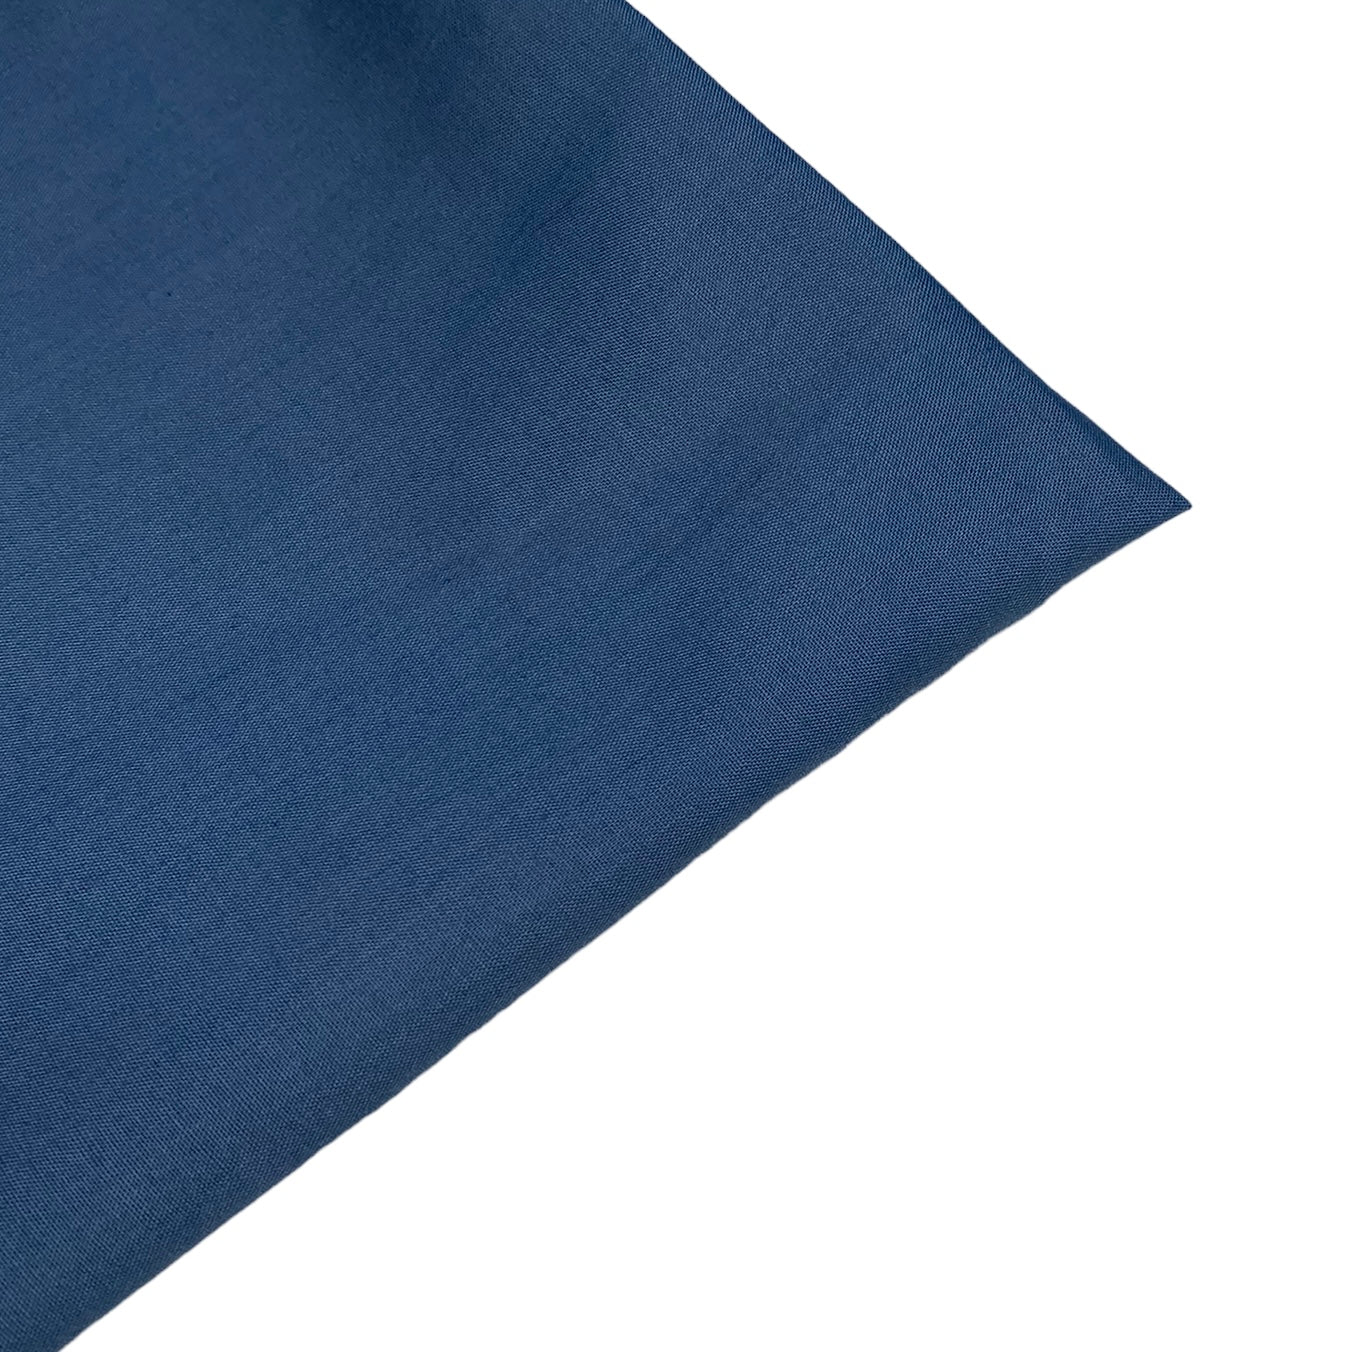 Polyester/Cotton Broadcloth - Blue Grey